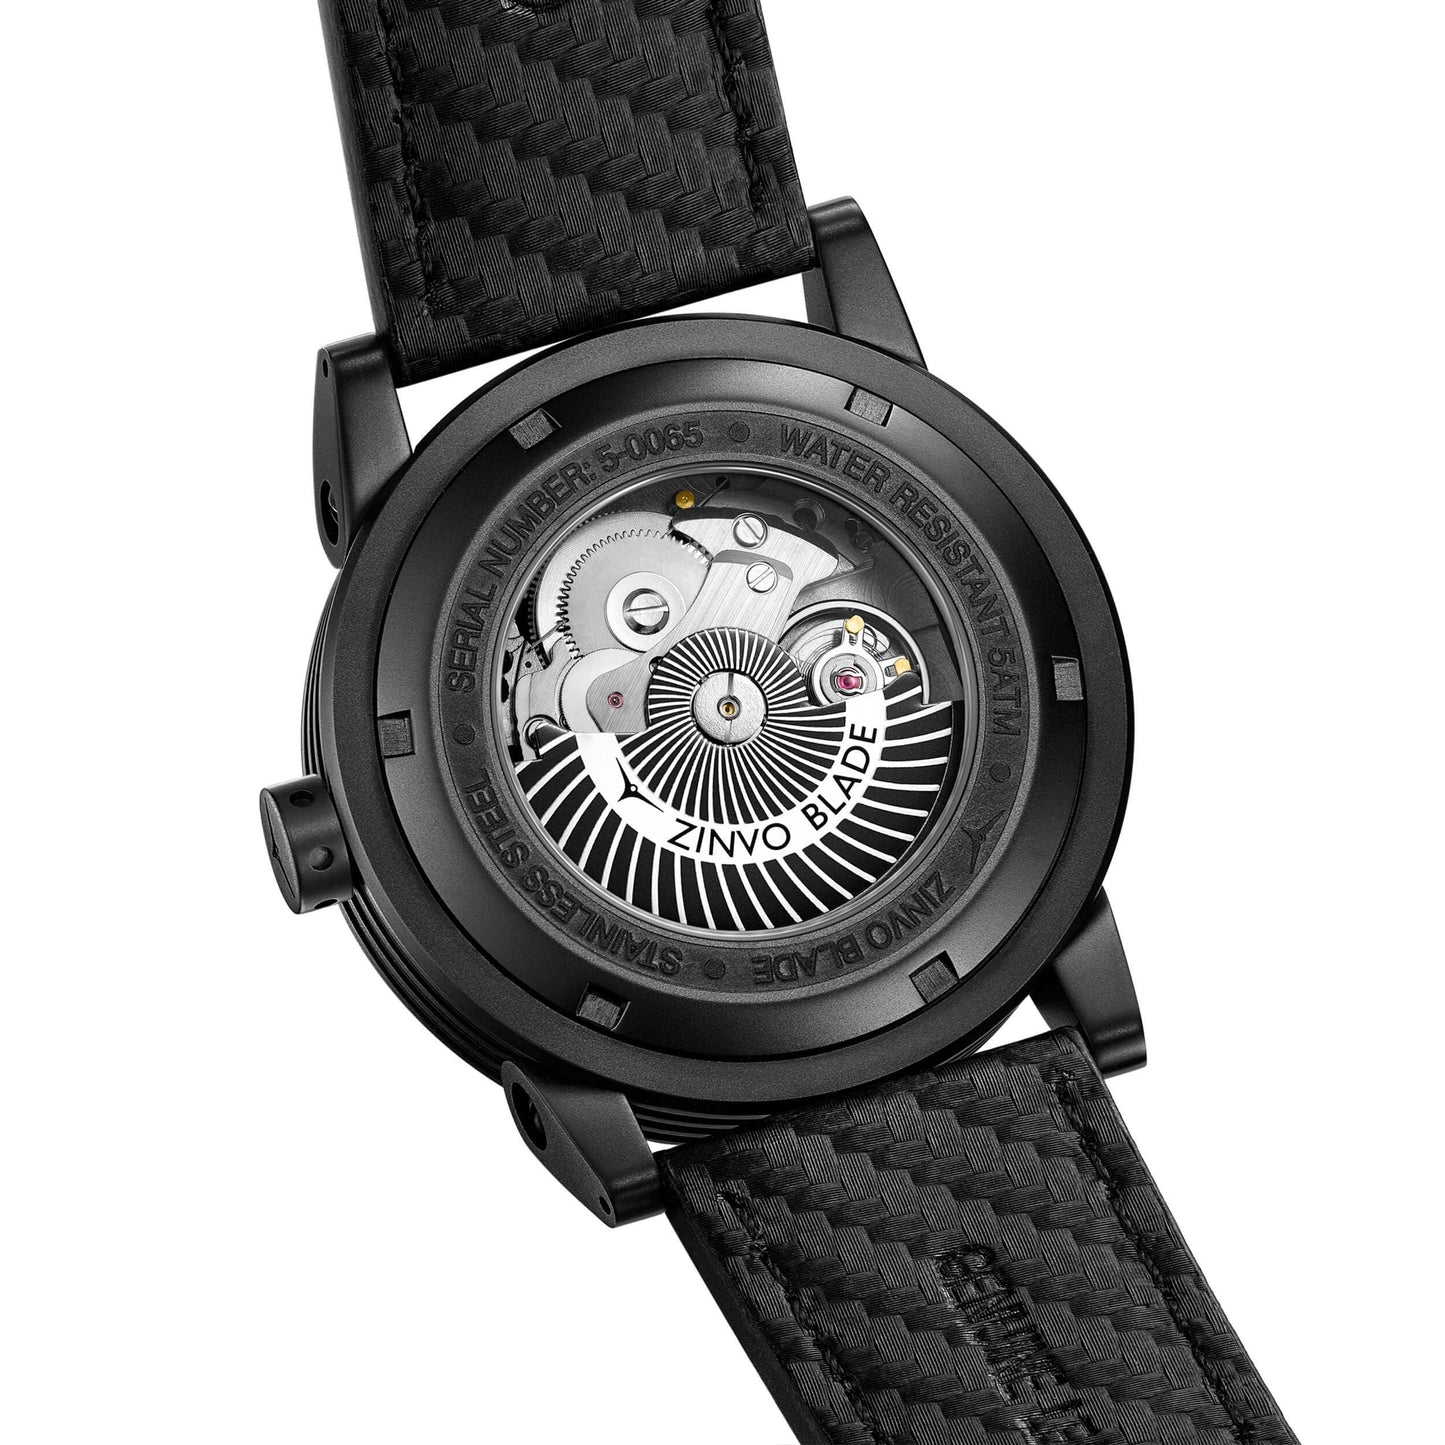 Blade Men's Automatic Watch in Solid Black from ZINVO